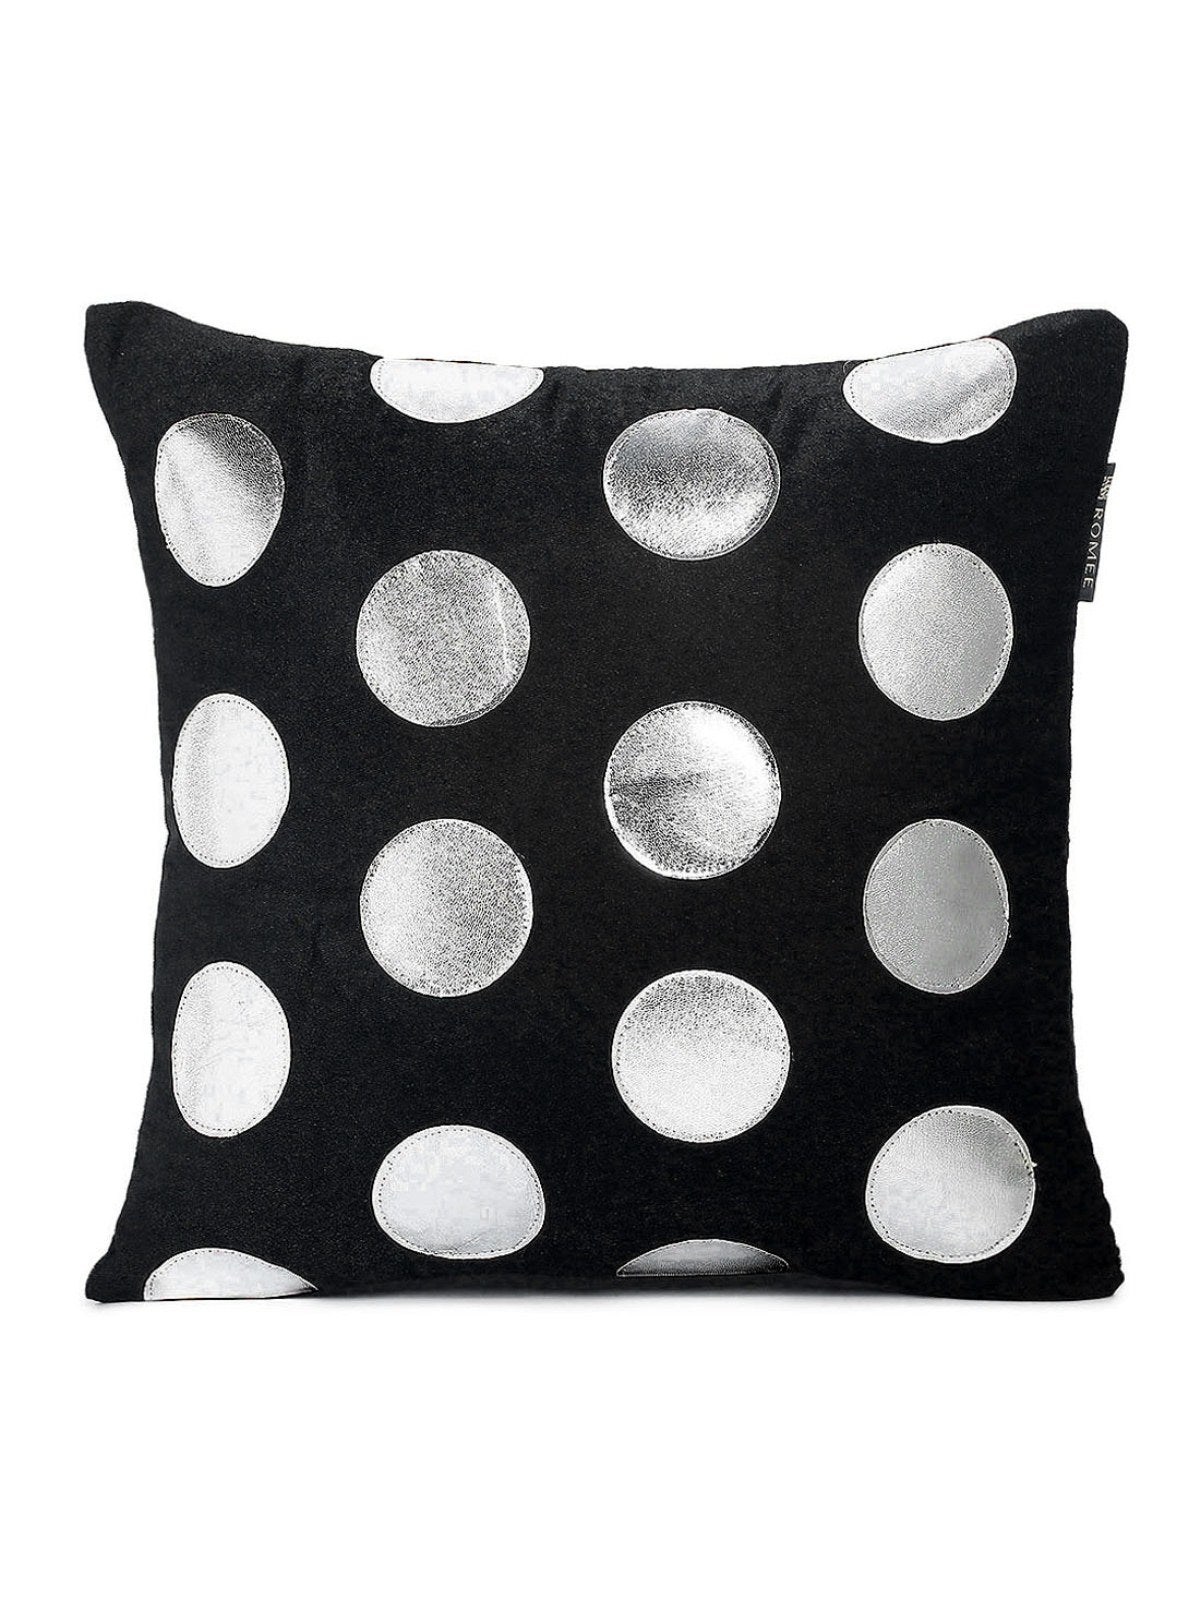 Soft Polyester Velvet Circle Patchwork Designer Cushion Covers 16x16 inches, Set of 5 - Black